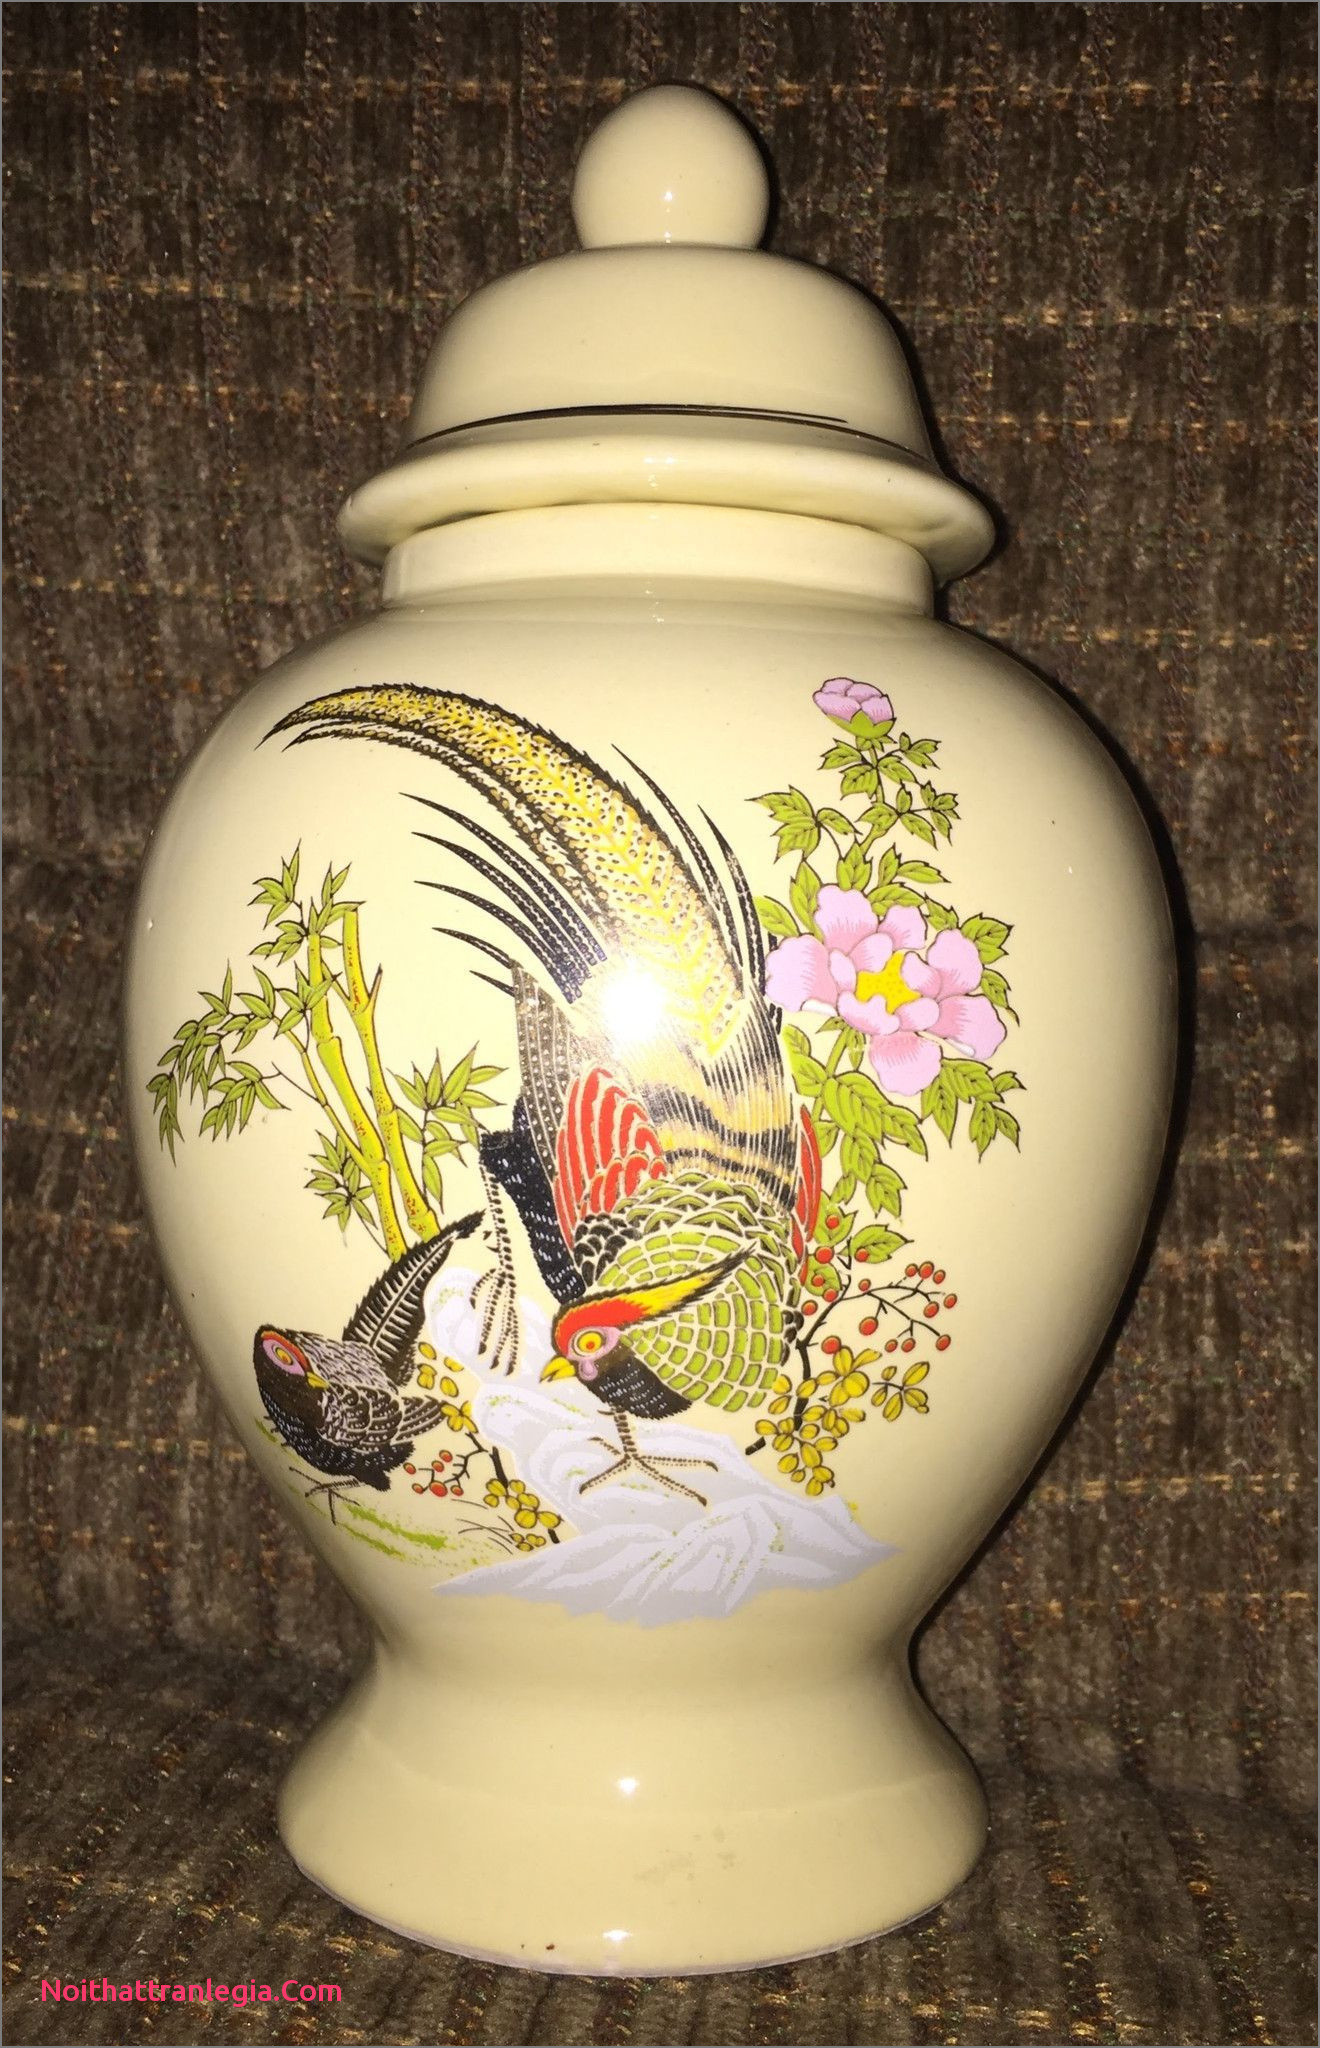 24 Cute Cloisonne Vase Value 2024 free download cloisonne vase value of 20 chinese antique vase noithattranlegia vases design throughout vintage collectible asian vase jar hand painted two birds bamboo and flowers